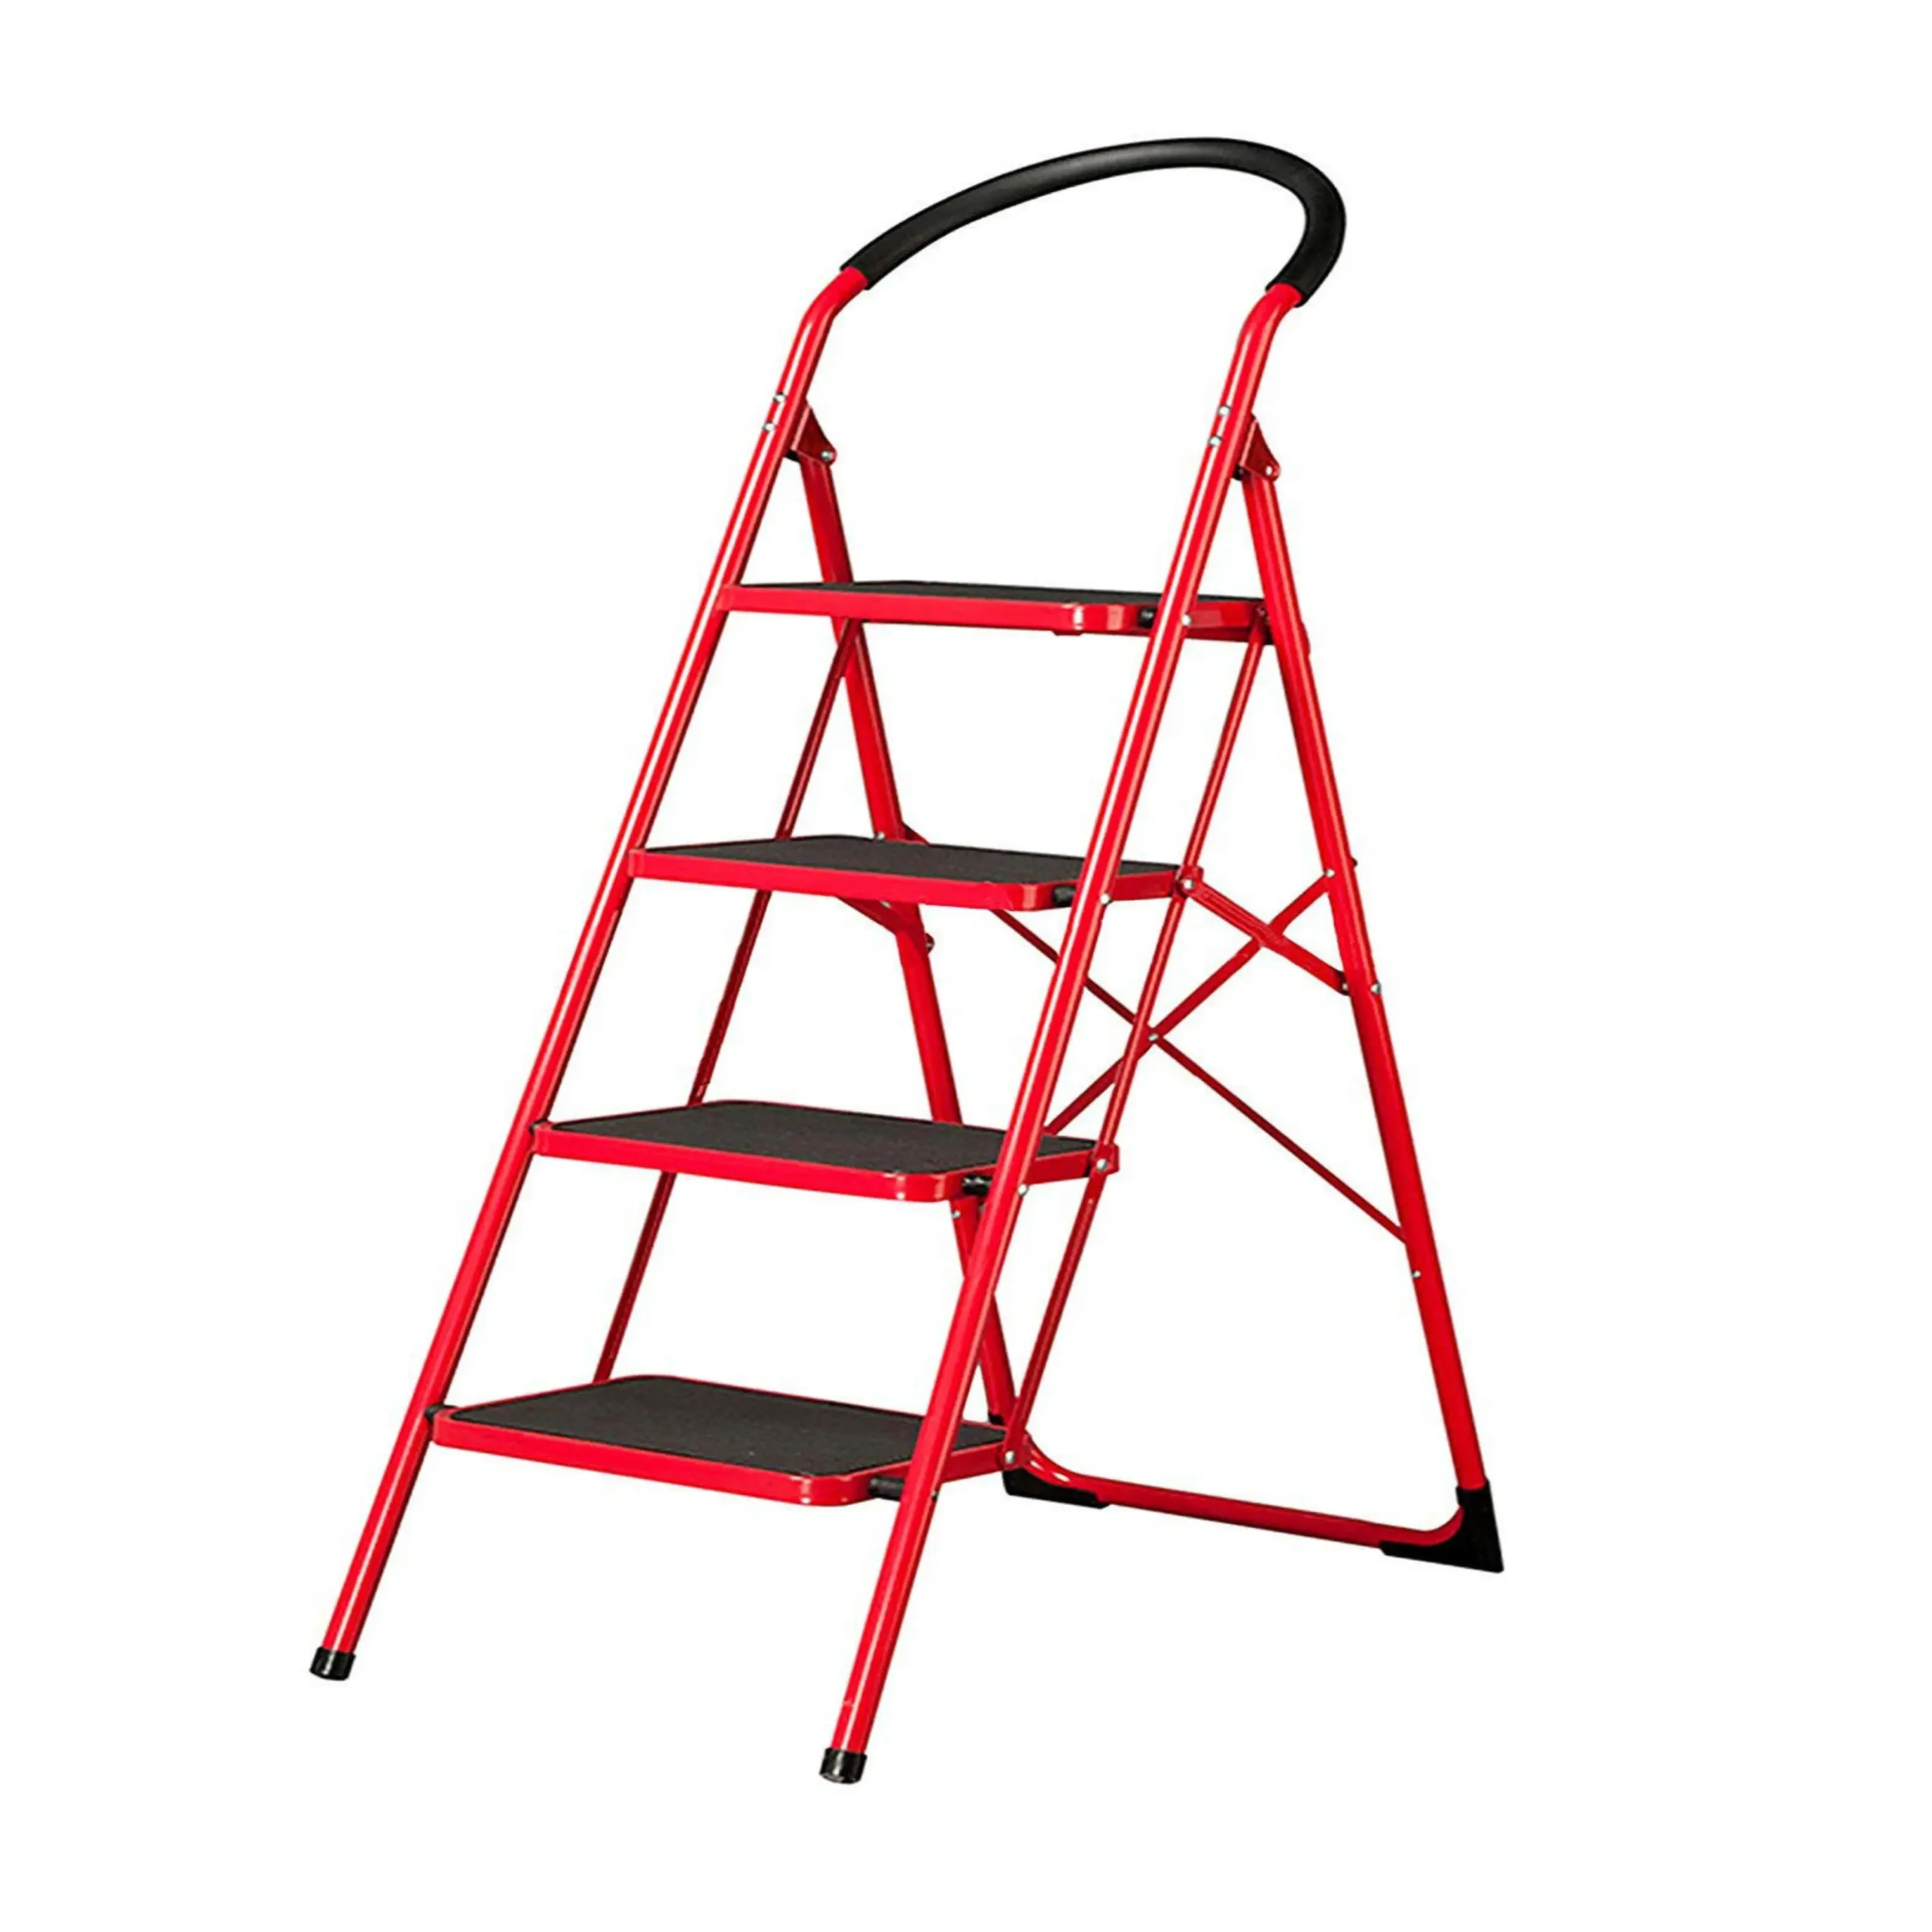 4 LAYER MULTIFUNCTION HOUSEHOLD LADDER, FOLDABLE LADDER WITH SAFETY HOLD HANDLE, STURDY AND DURABLE LADDER